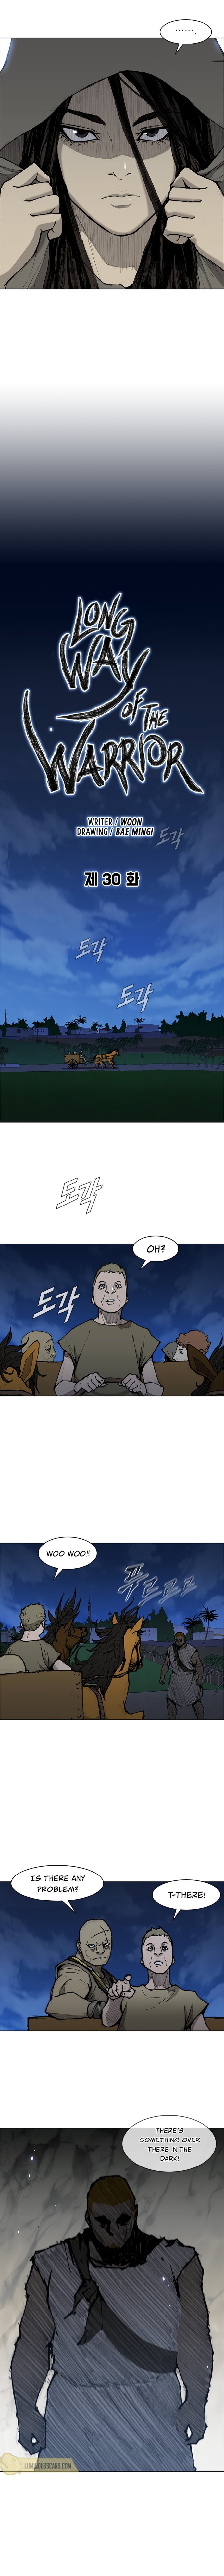 long-way-of-the-warrior-chap-30-2